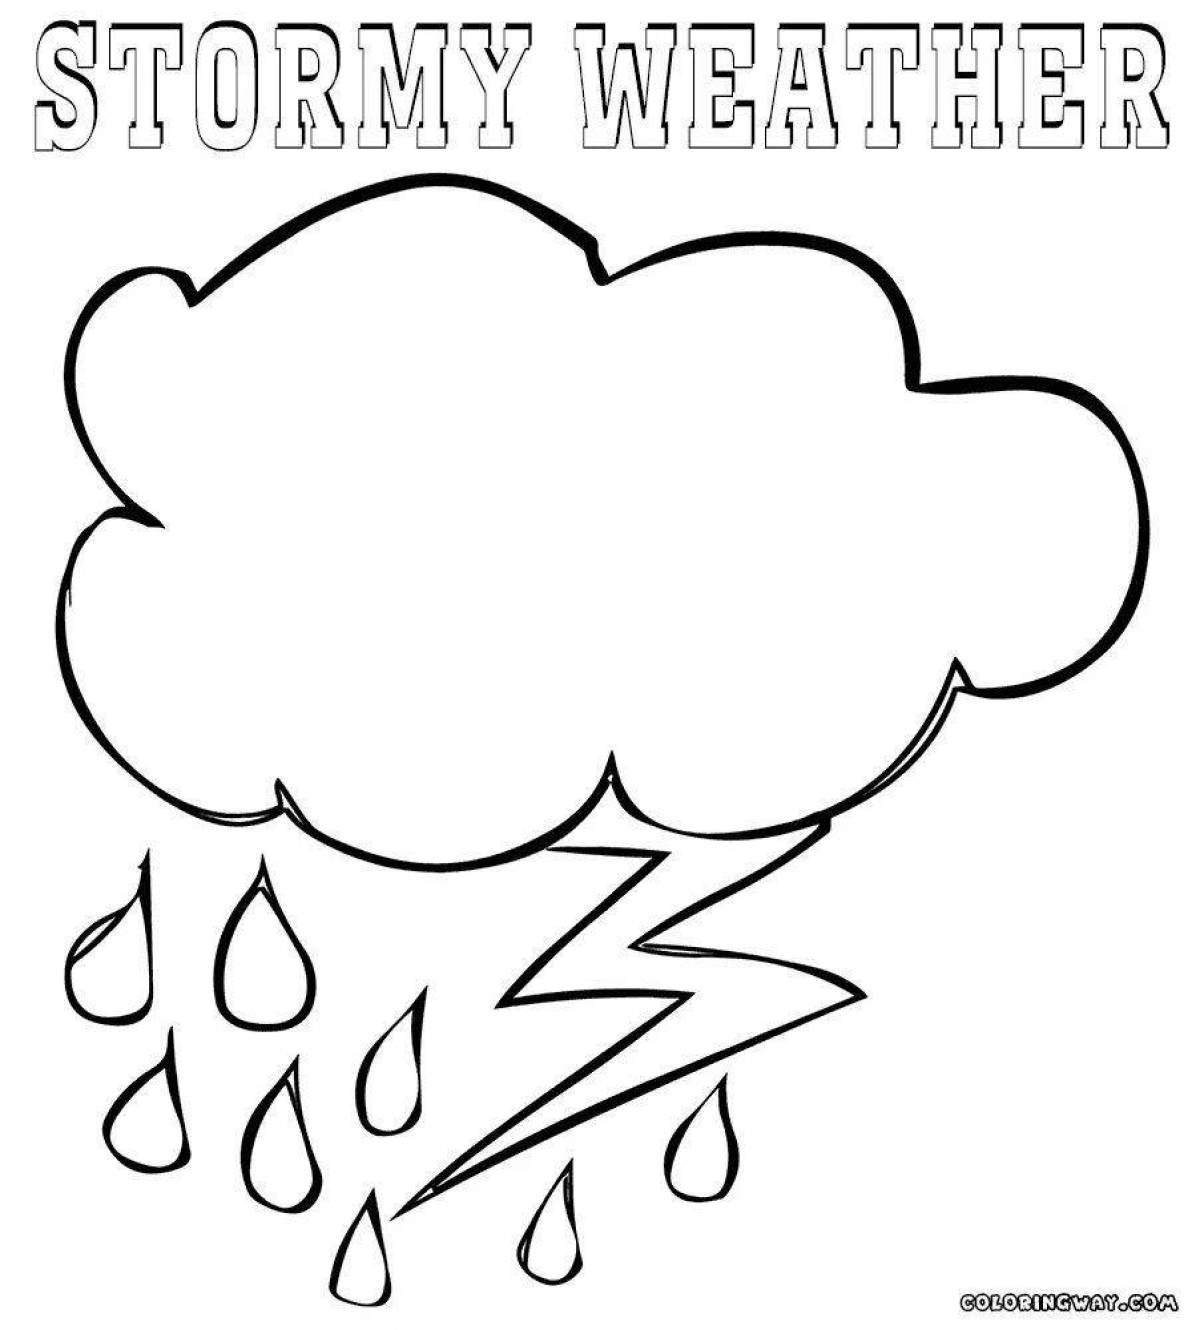 Playful weather coloring page